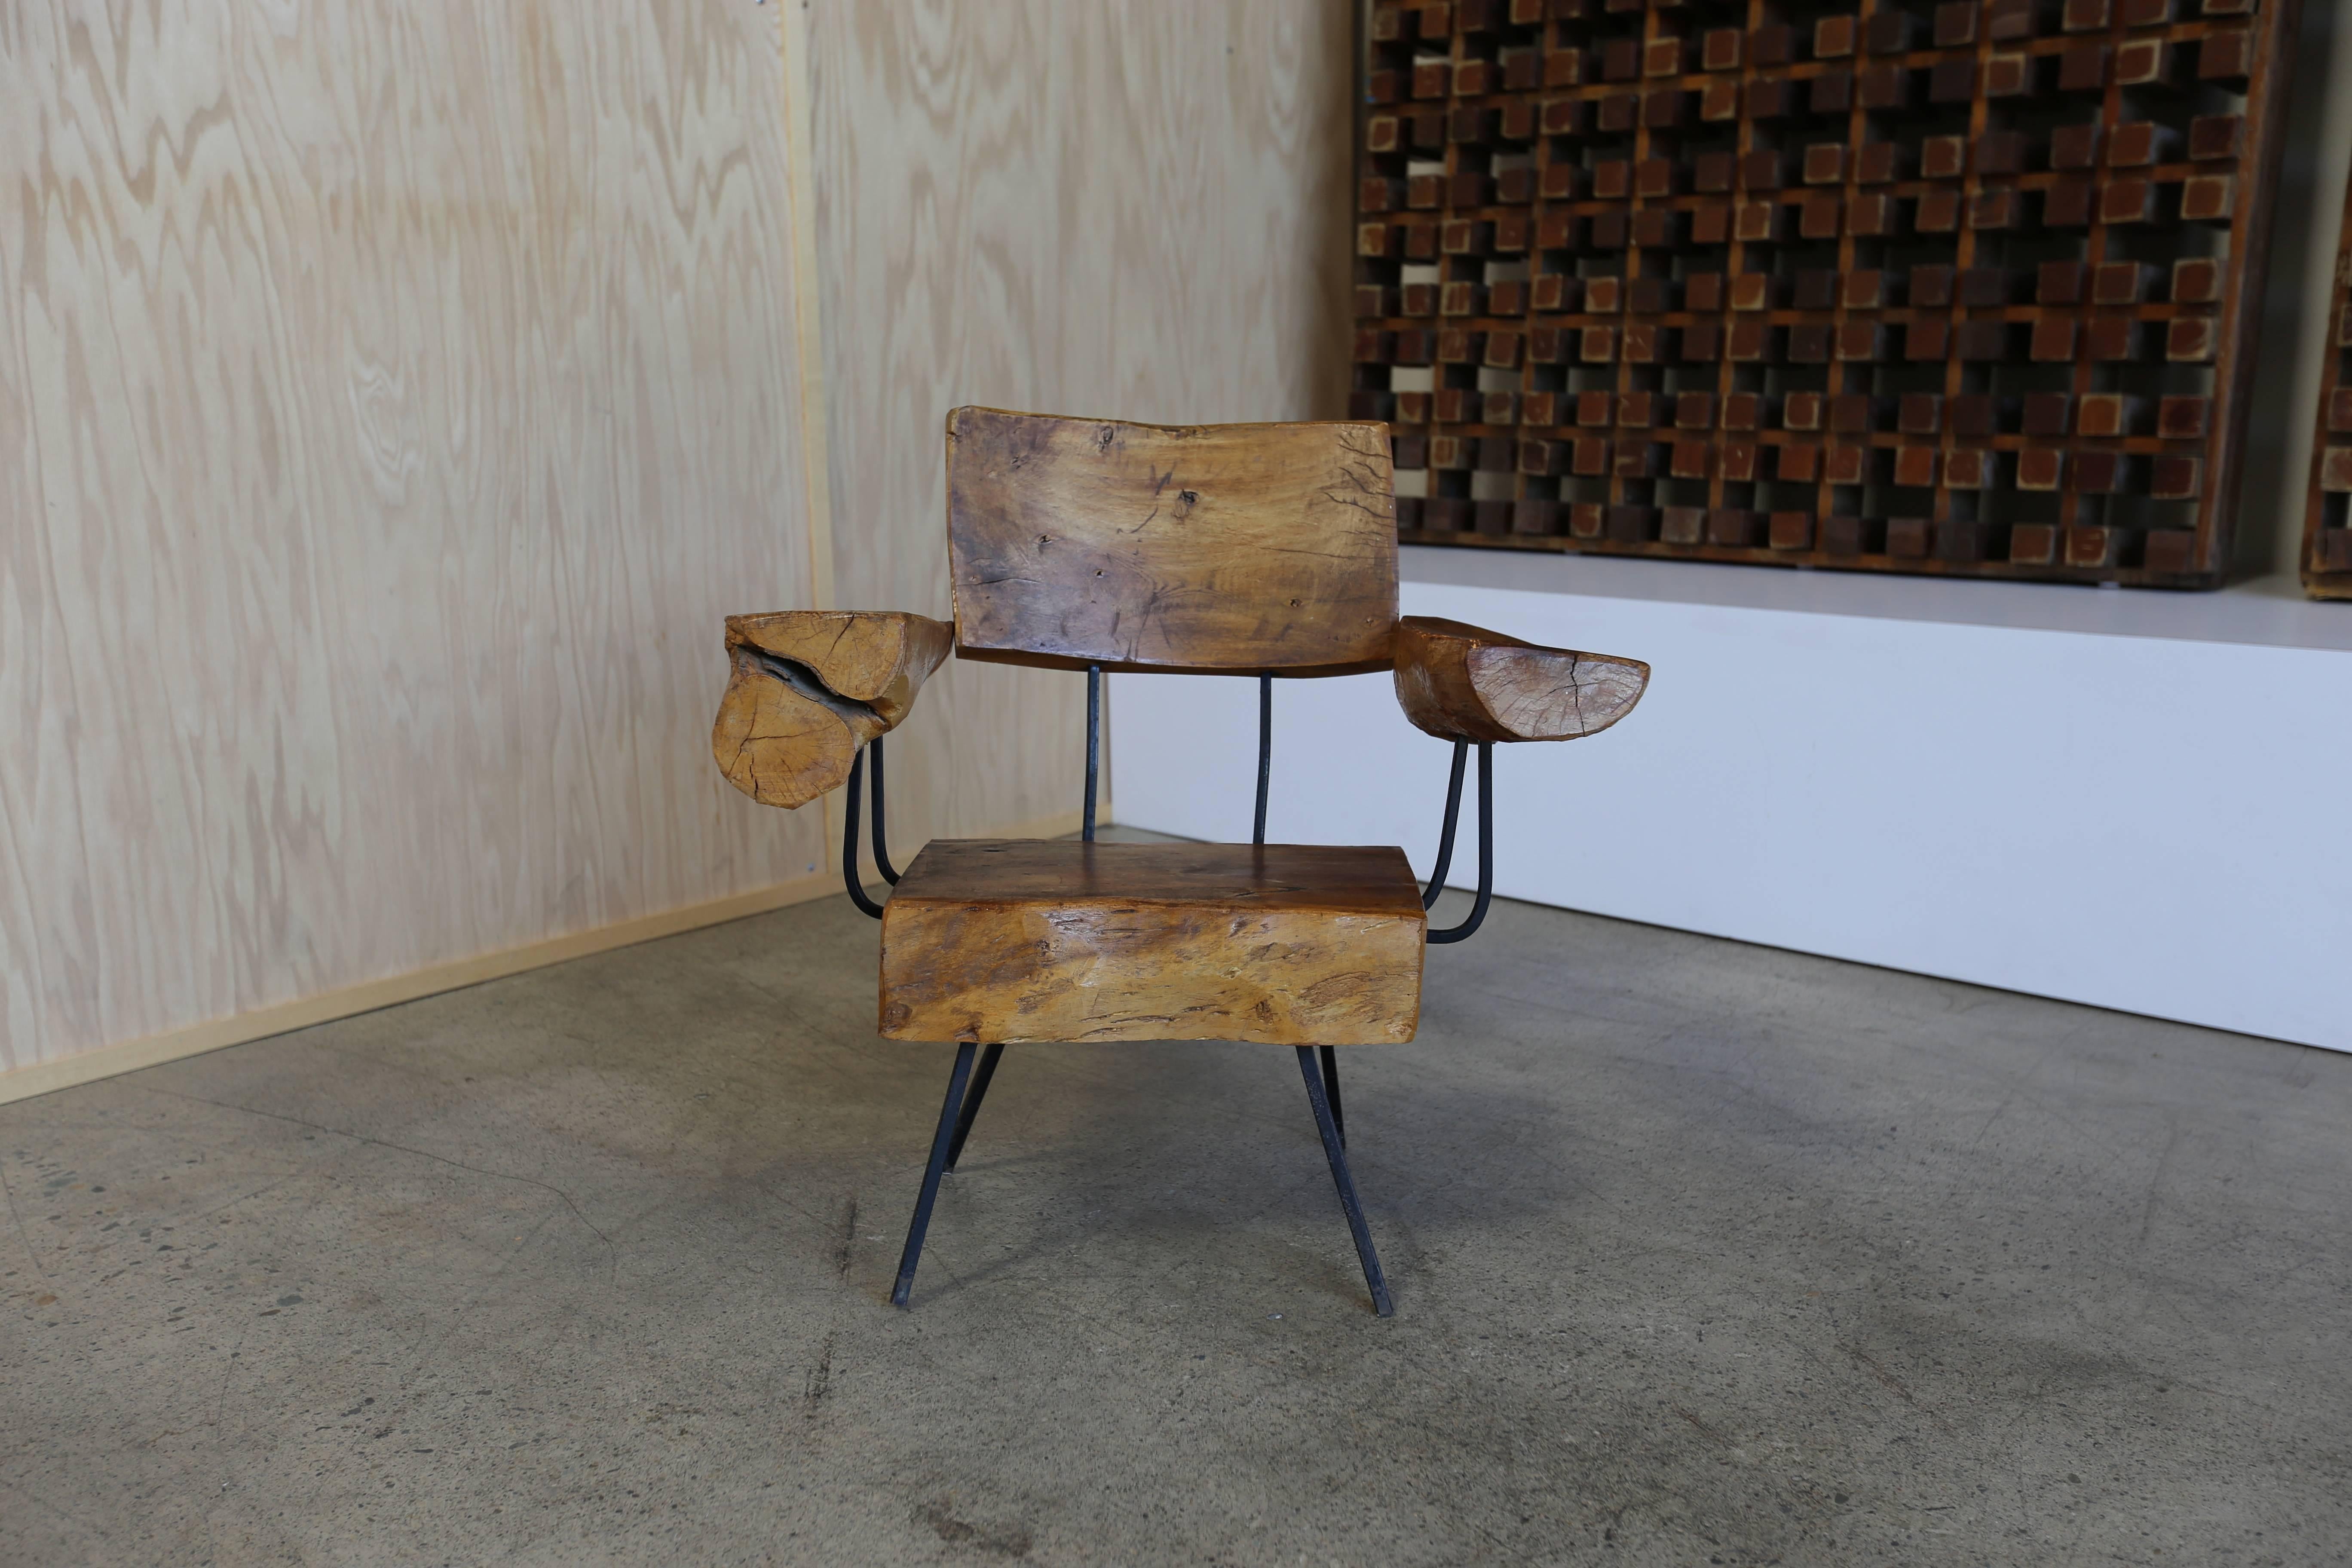 Primitive Wood Log Table and Chairs by Sabena 1